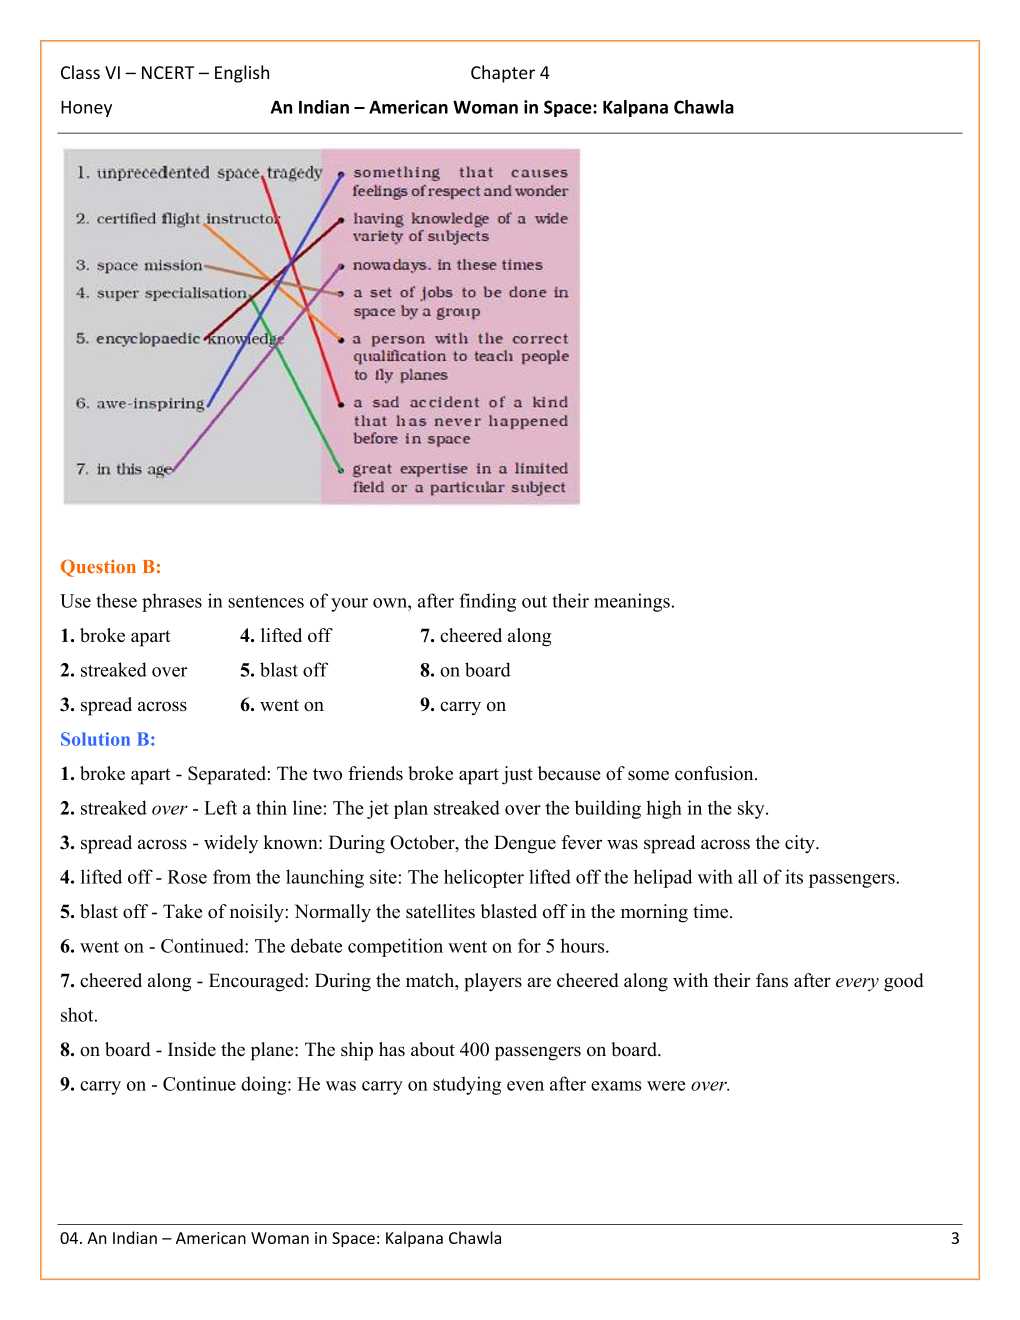 ncert-solutions-for-class-6-english-honeysuckle-chapter-4-an-indian